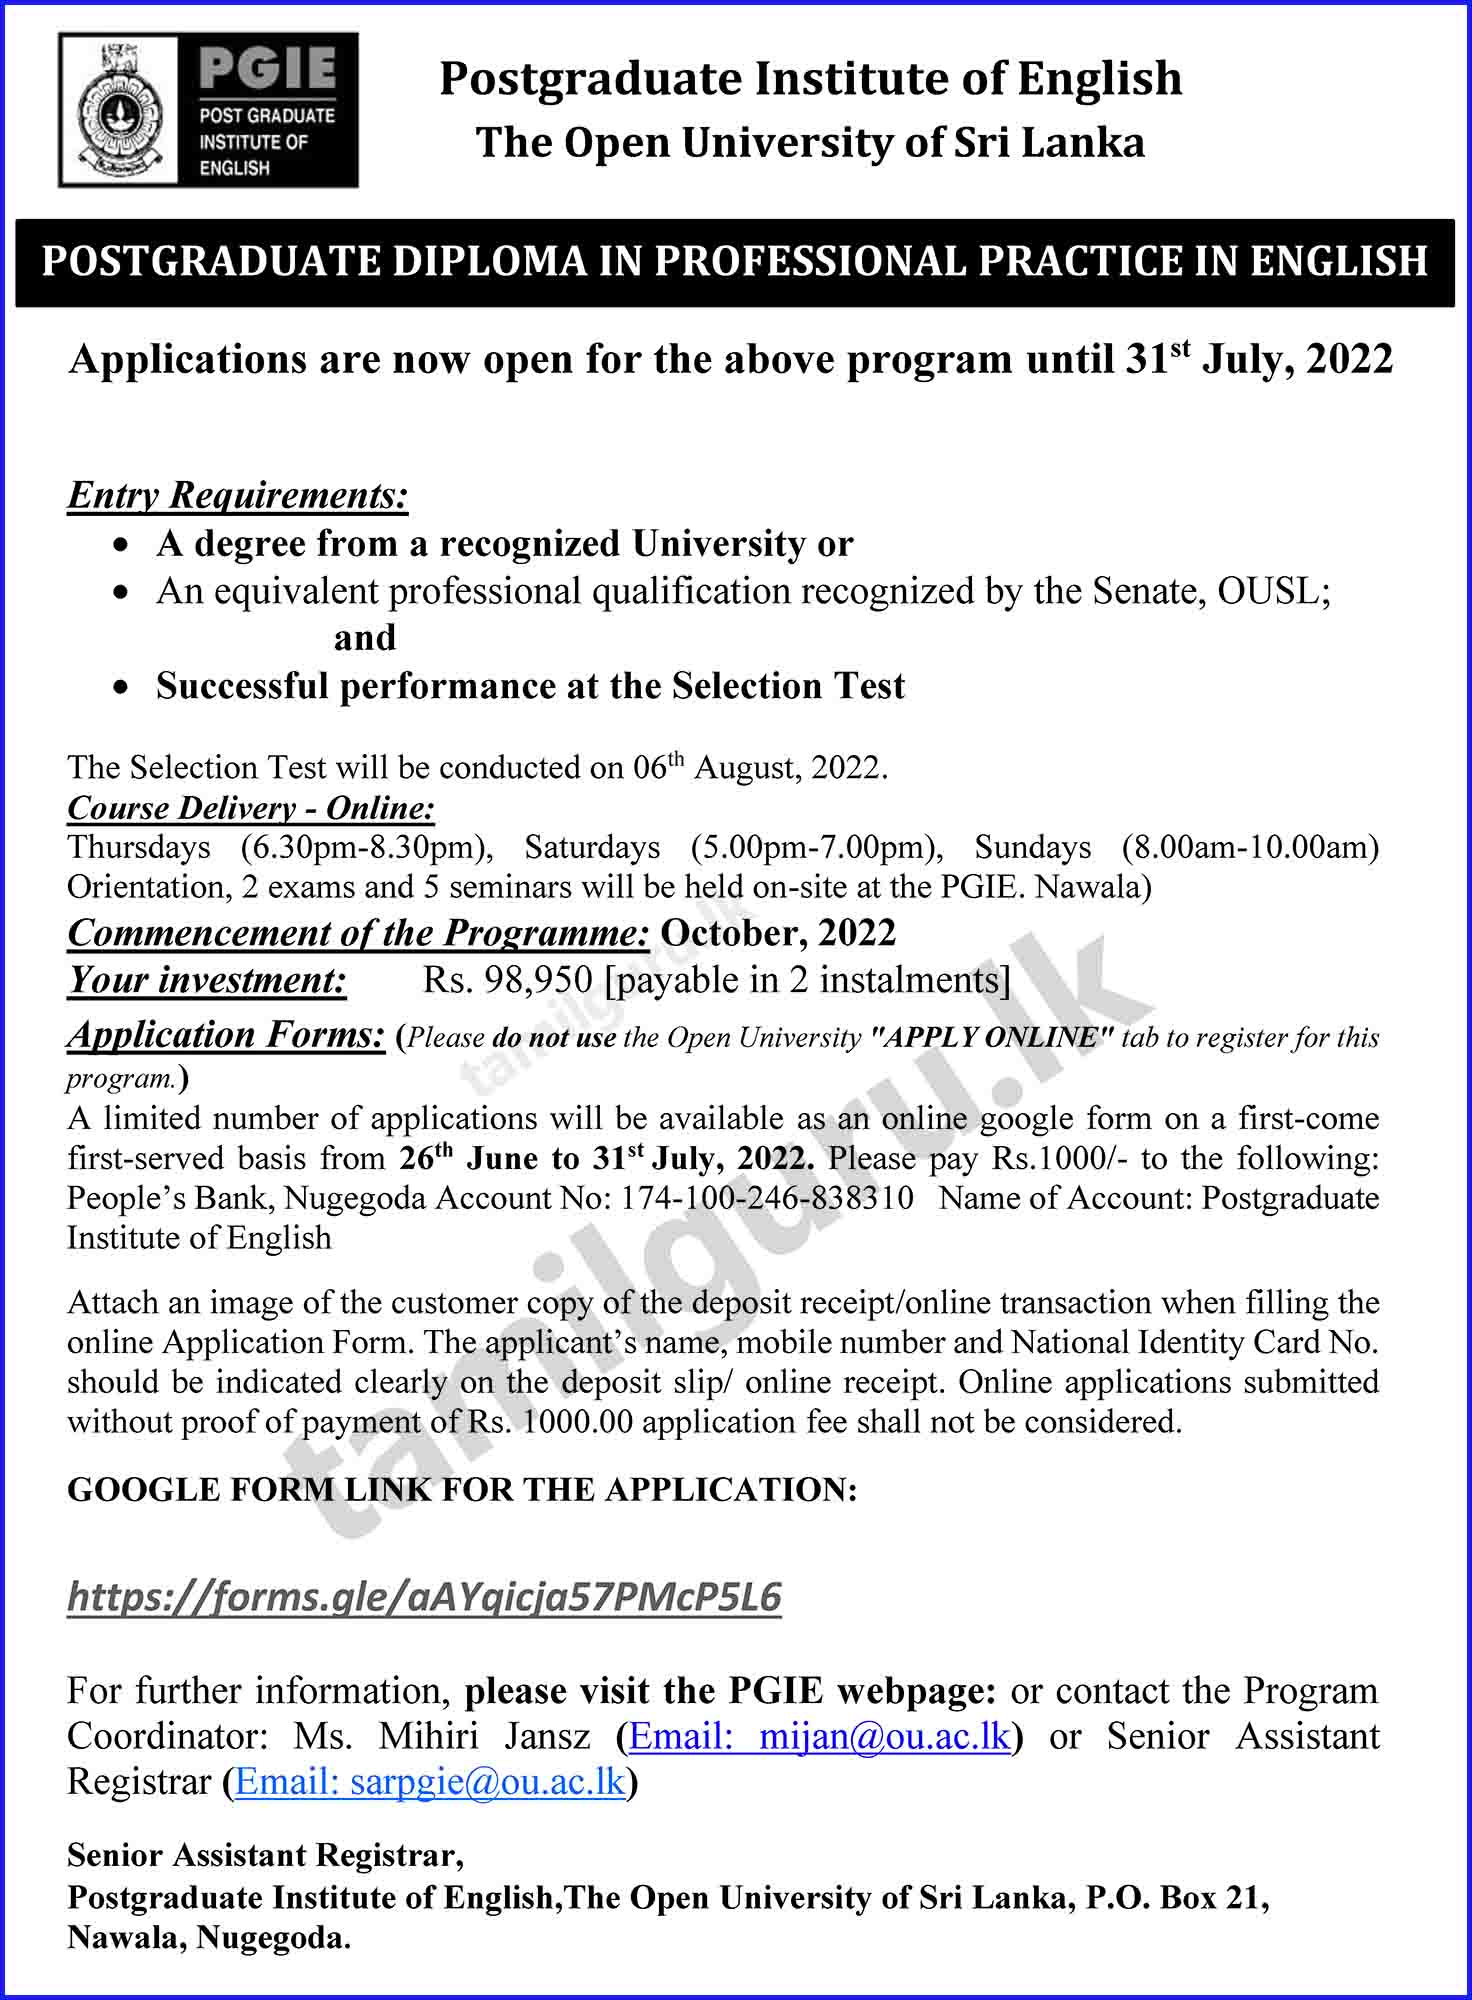 Postgraduate Diploma in Professional Practice in English (PPE) 2022/23 - The Open University of Sri Lanka (OUSL)